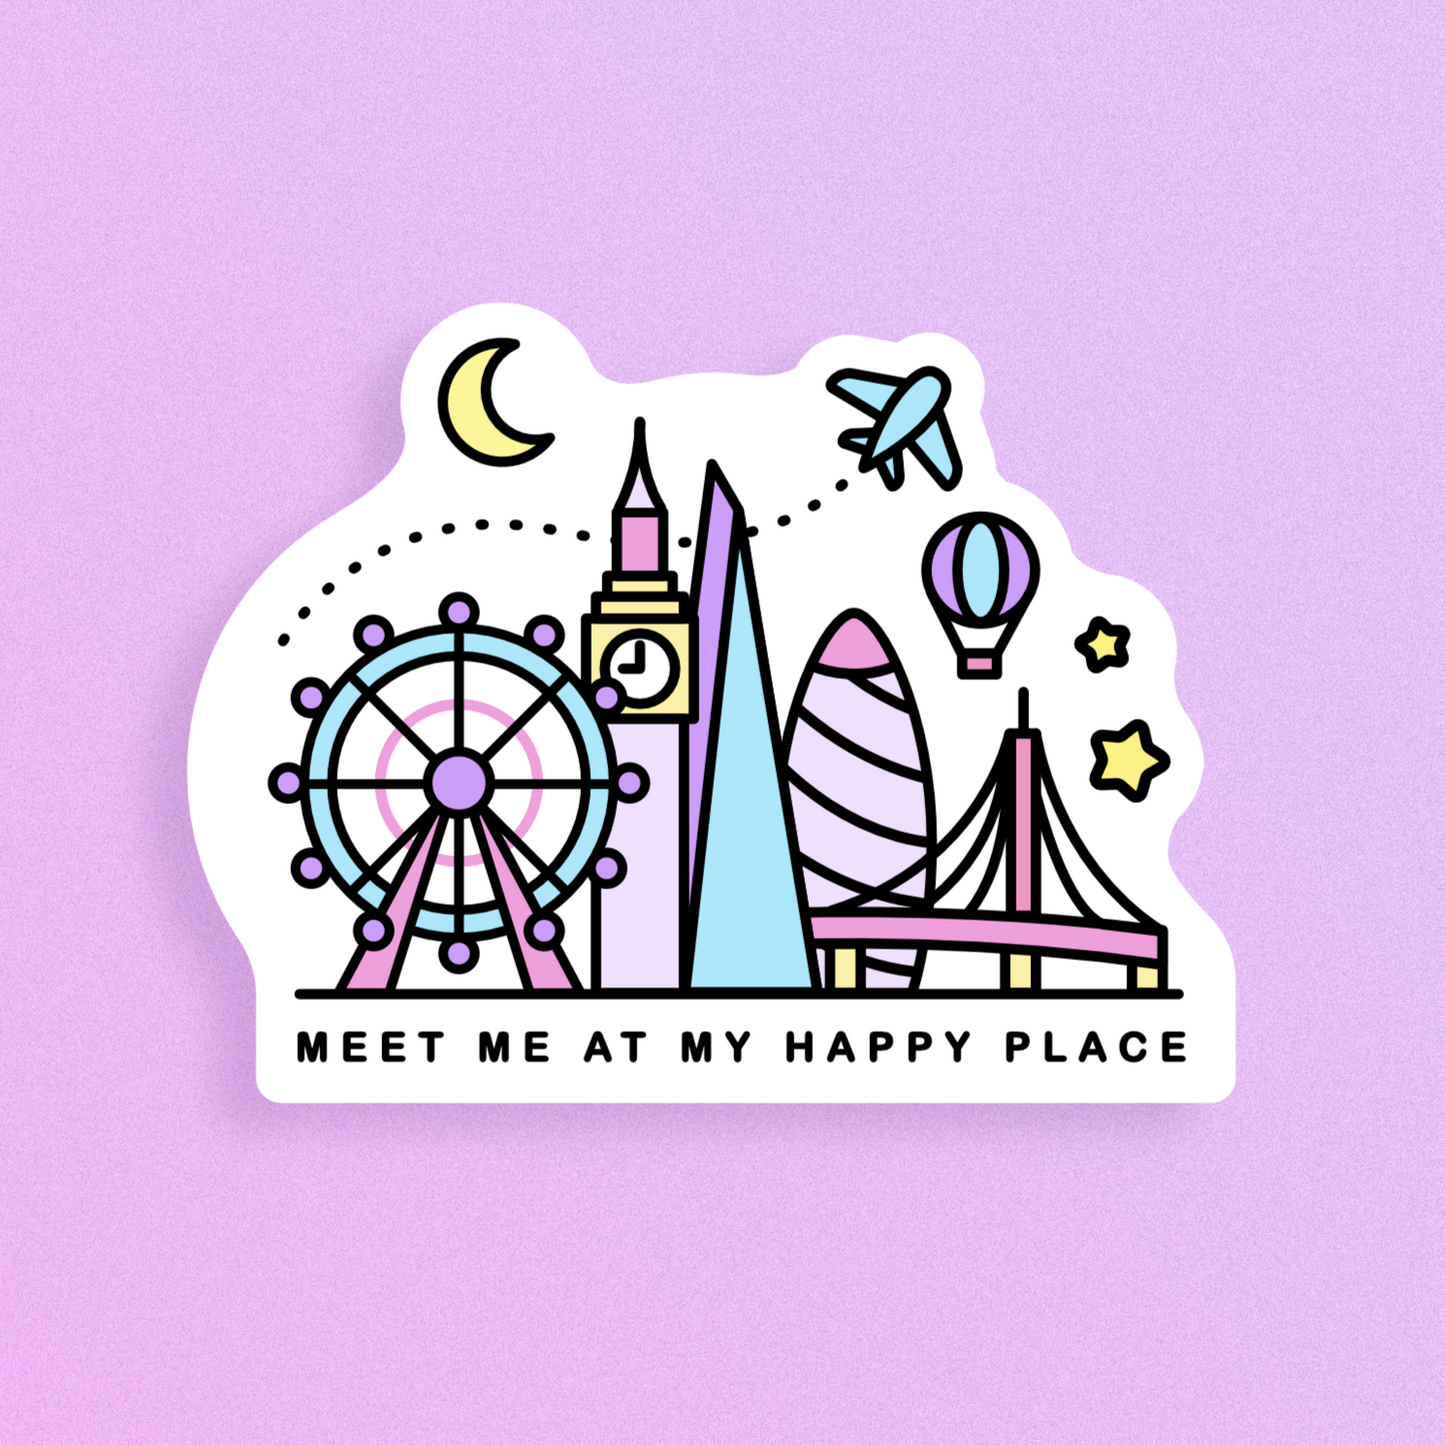 a die cut matte, vinyl sticker with simplistic, colourful illustrations of the london eye ferris wheel, big ben, the shard, the gherkin and london bridge. underneath a small sprinkle of stars and a crescent moon. underneath the skyline it says 'meet me at my happy place' in simple, clear text.